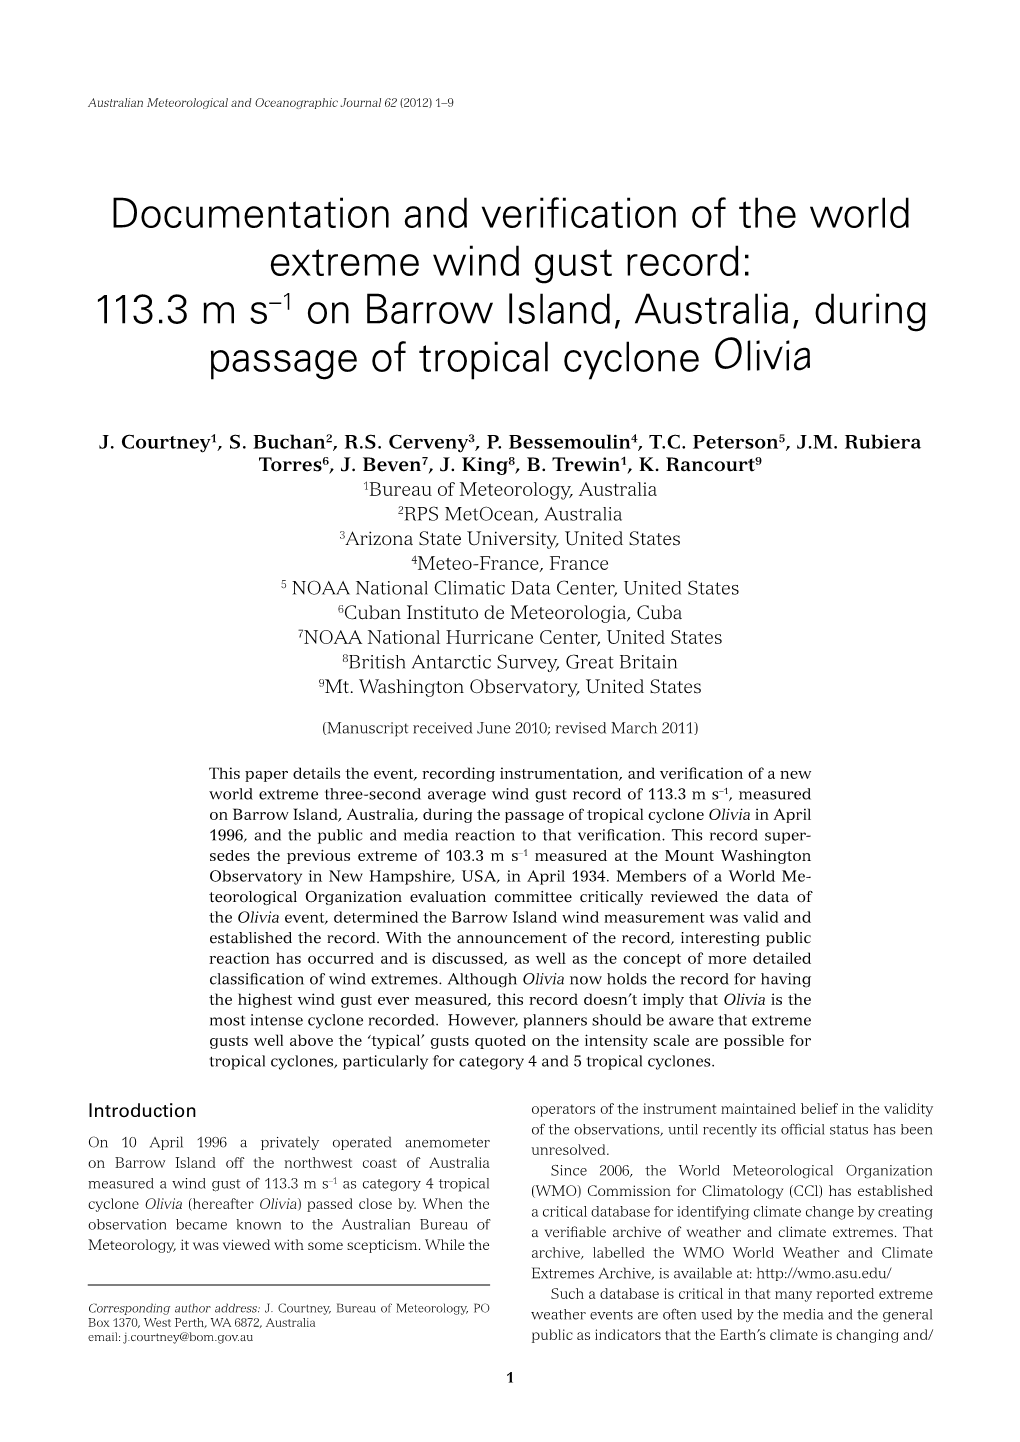 Documentation and Verification of the World Extreme Wind Gust Record: 113.3 M S–1 on Barrow Island, Australia, During Passage of Tropical Cyclone Olivia